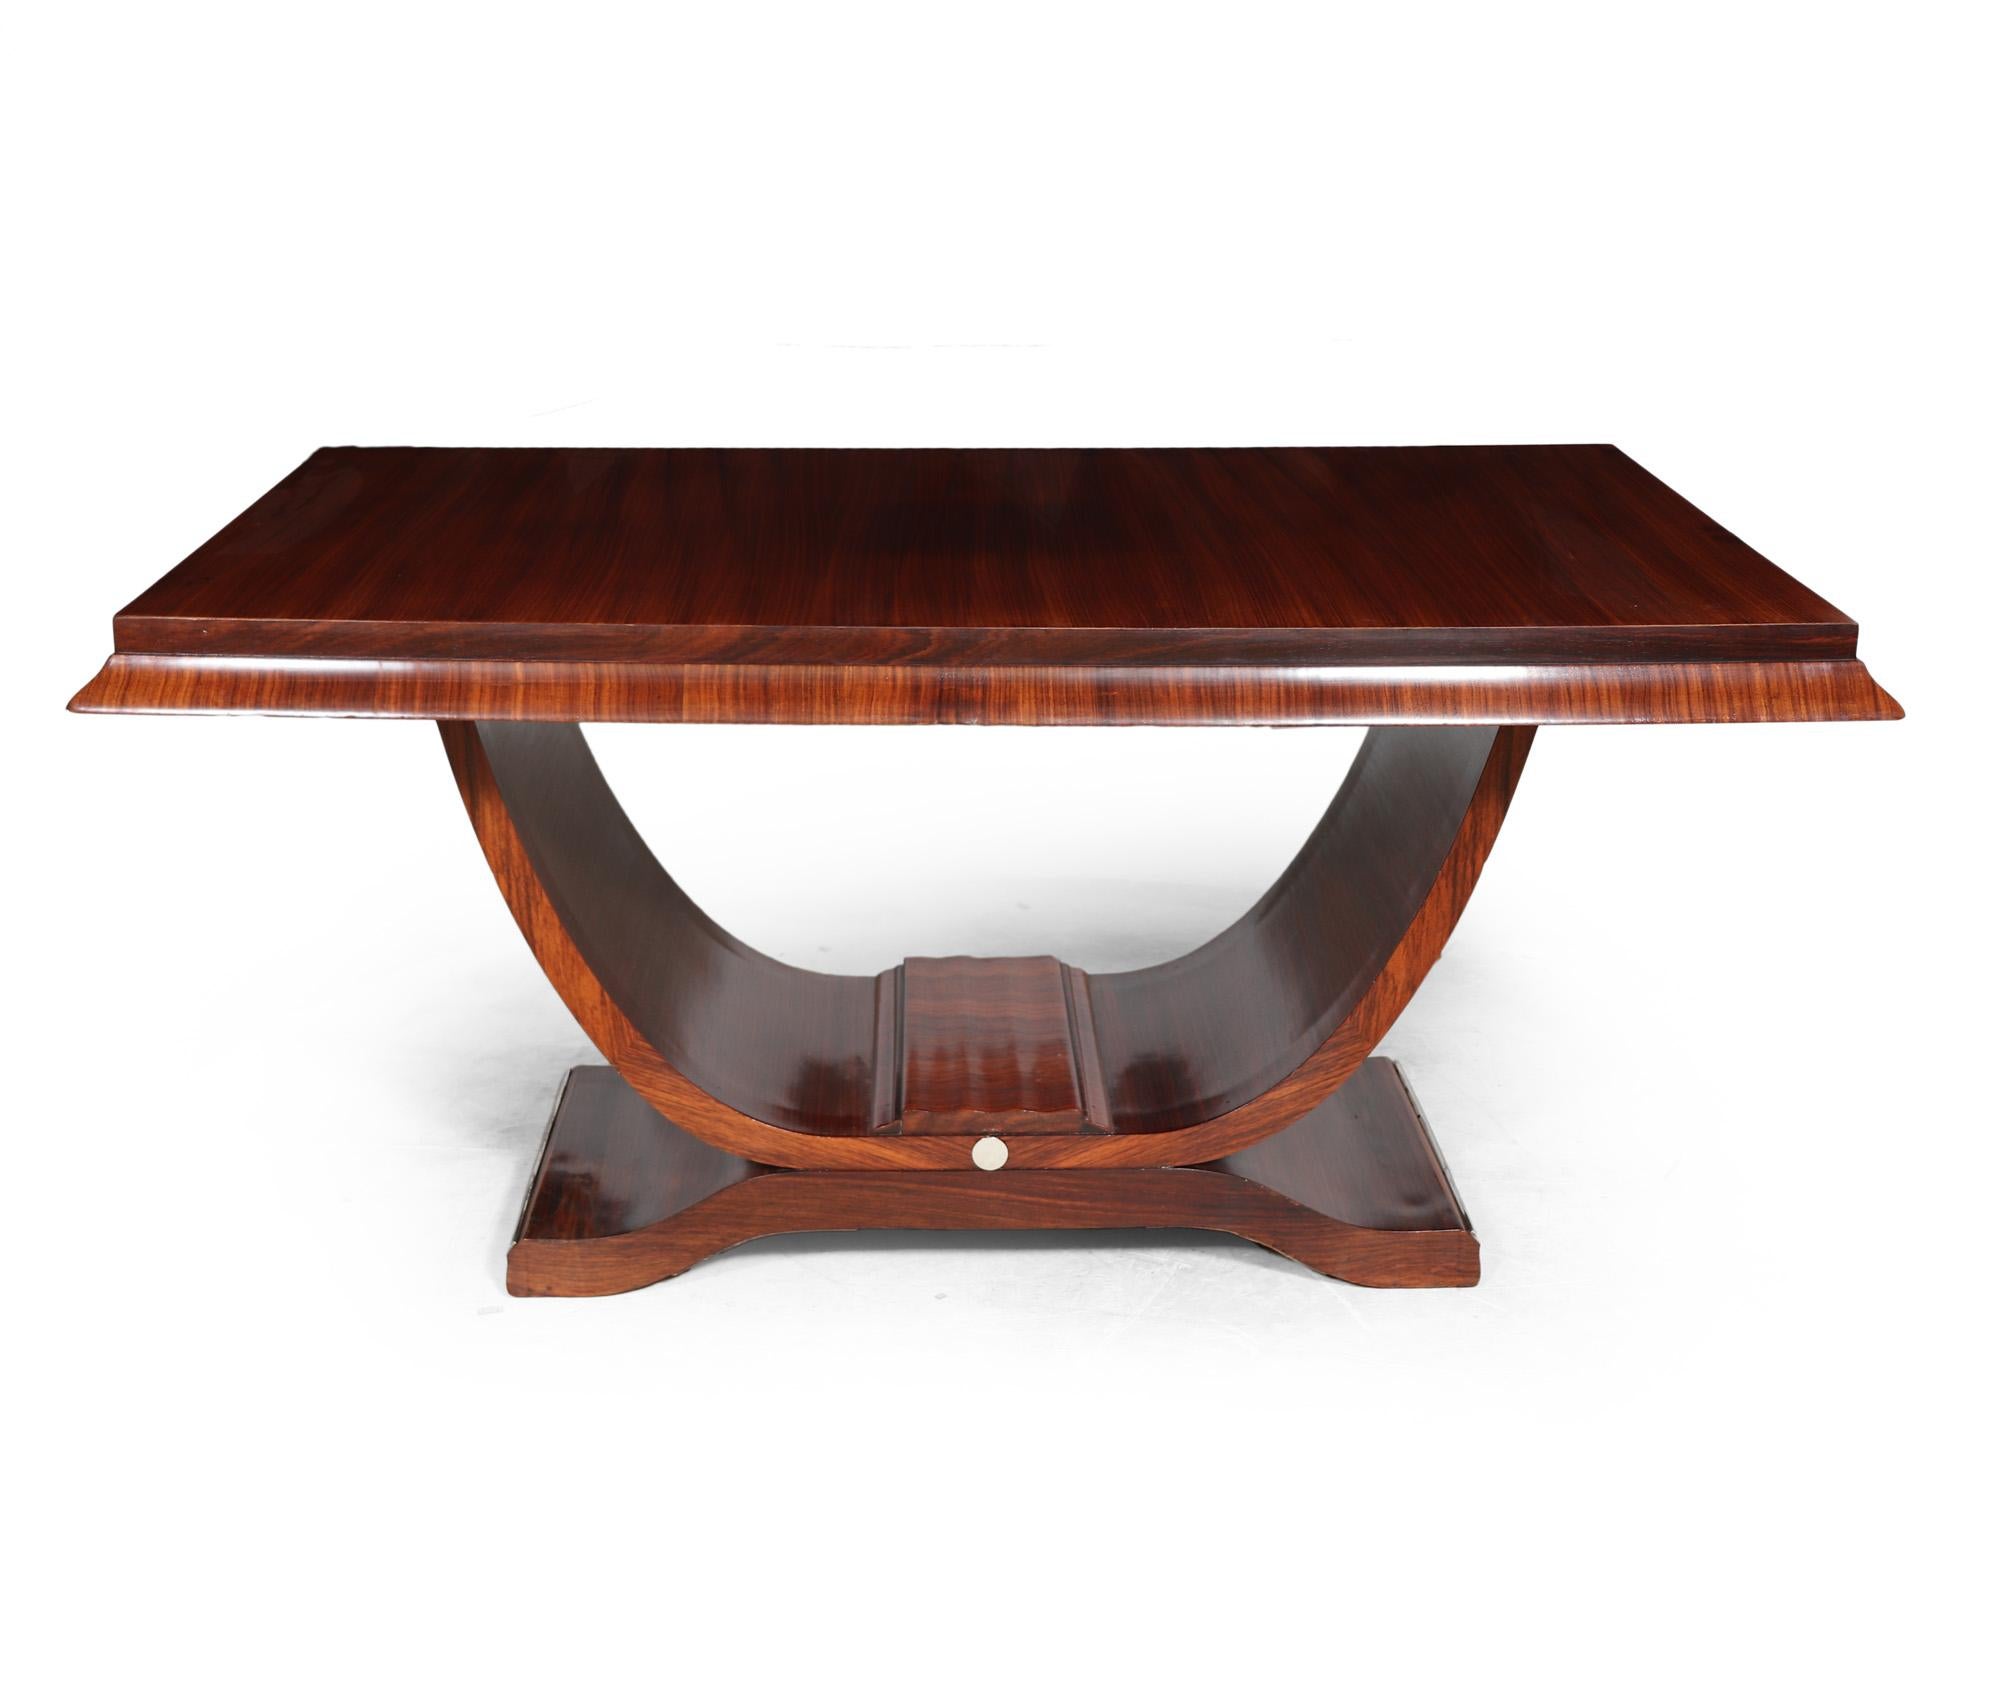 ART DECO TABLE WITH U BASE
A French u base dining table to seat up to six people produced in the 1920’s, in rosewood the table has a good sized rectangular top with shaped edging a u shaped upright support and a gently curved base with chromed